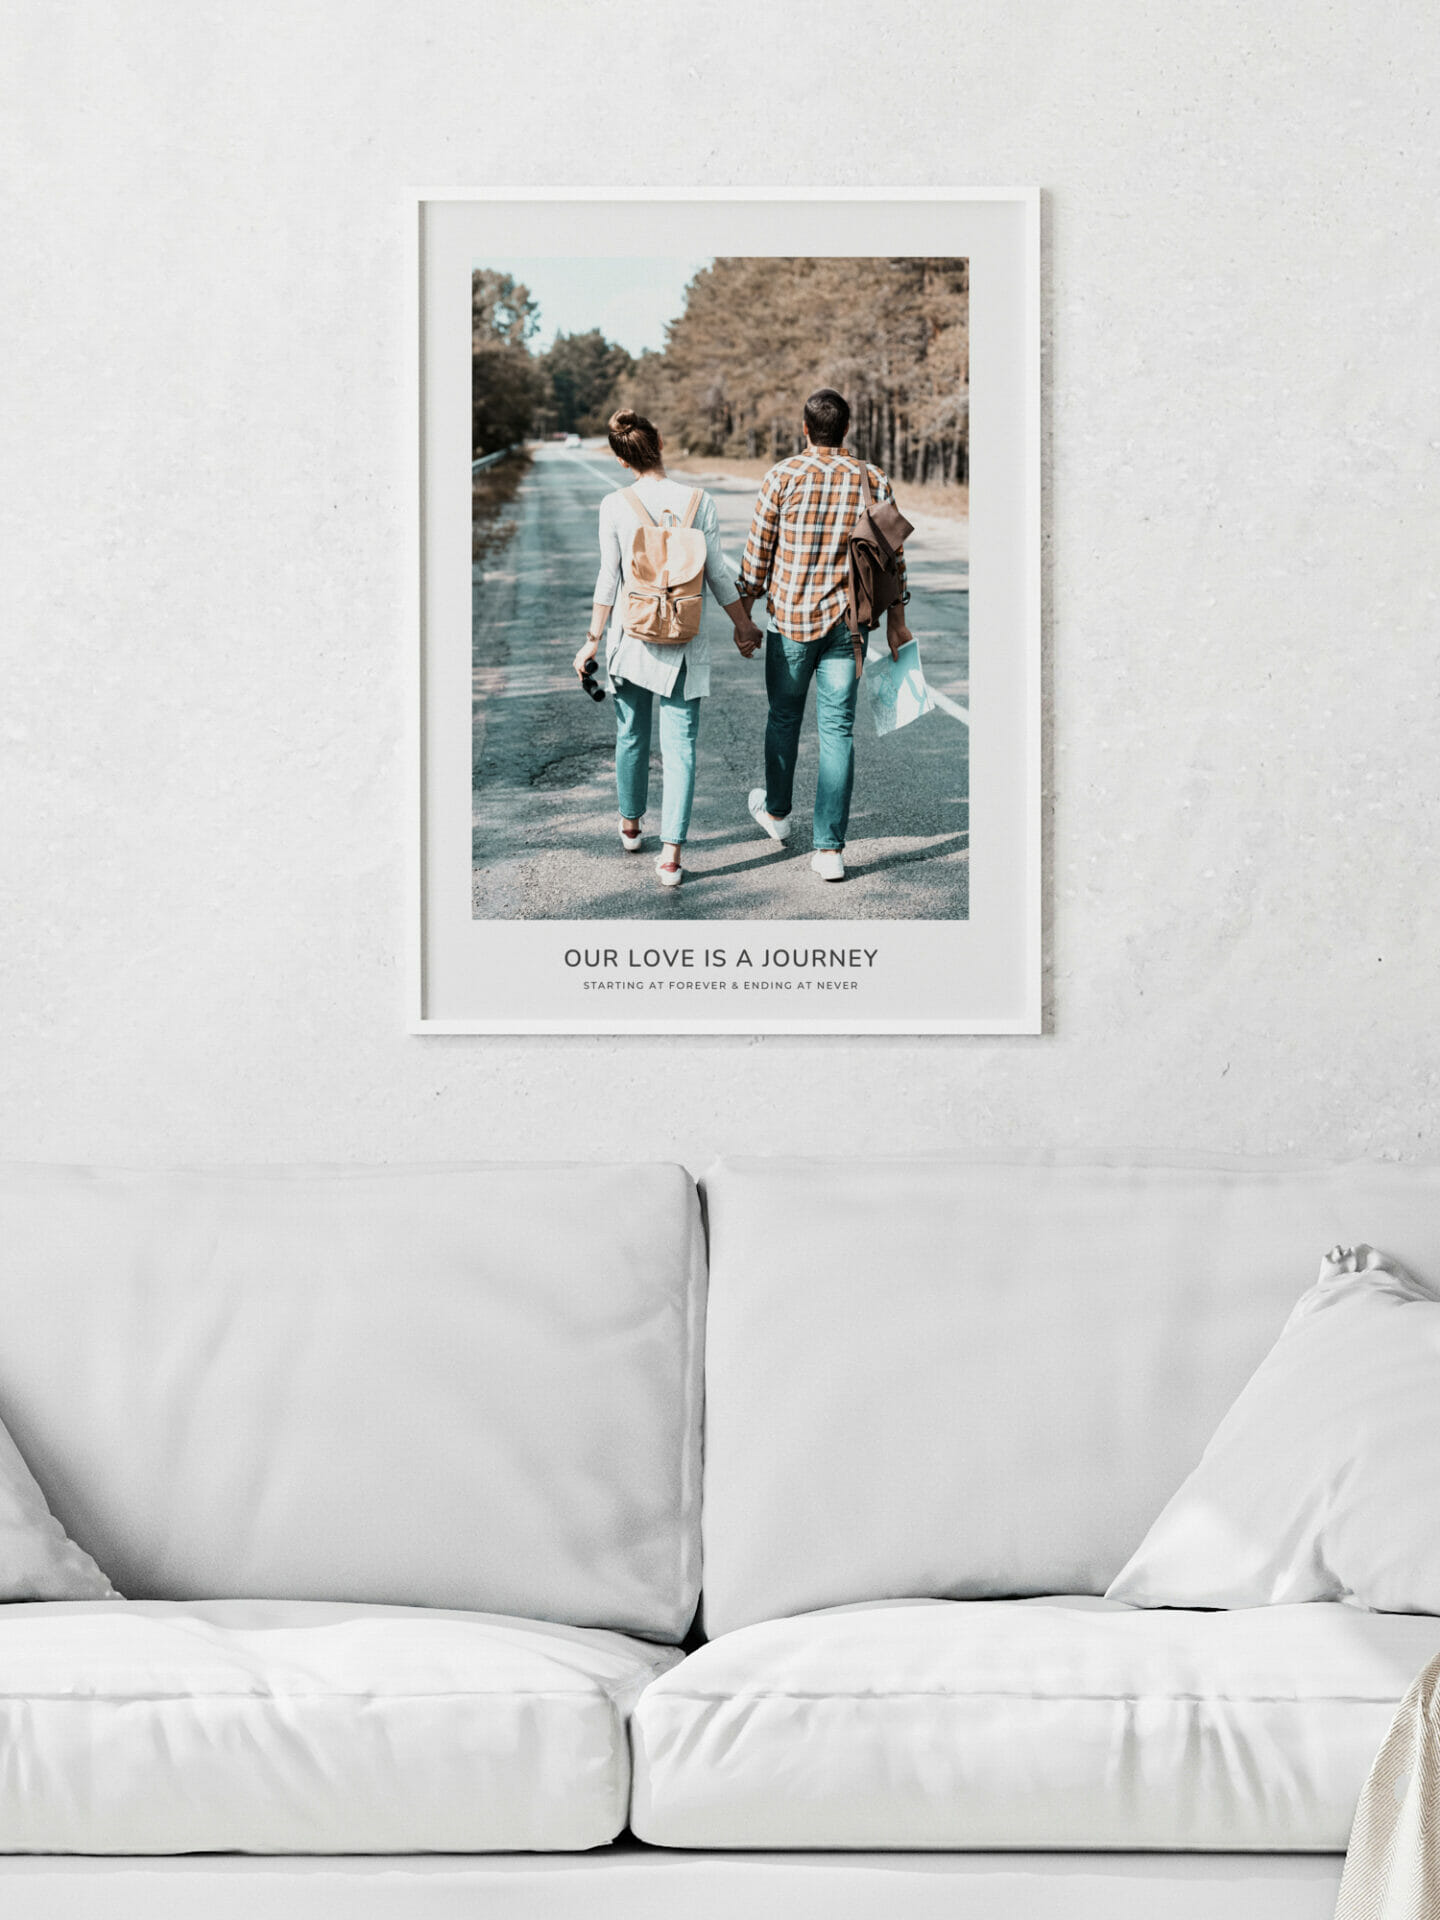 Interior with poster of couple walking down a road together